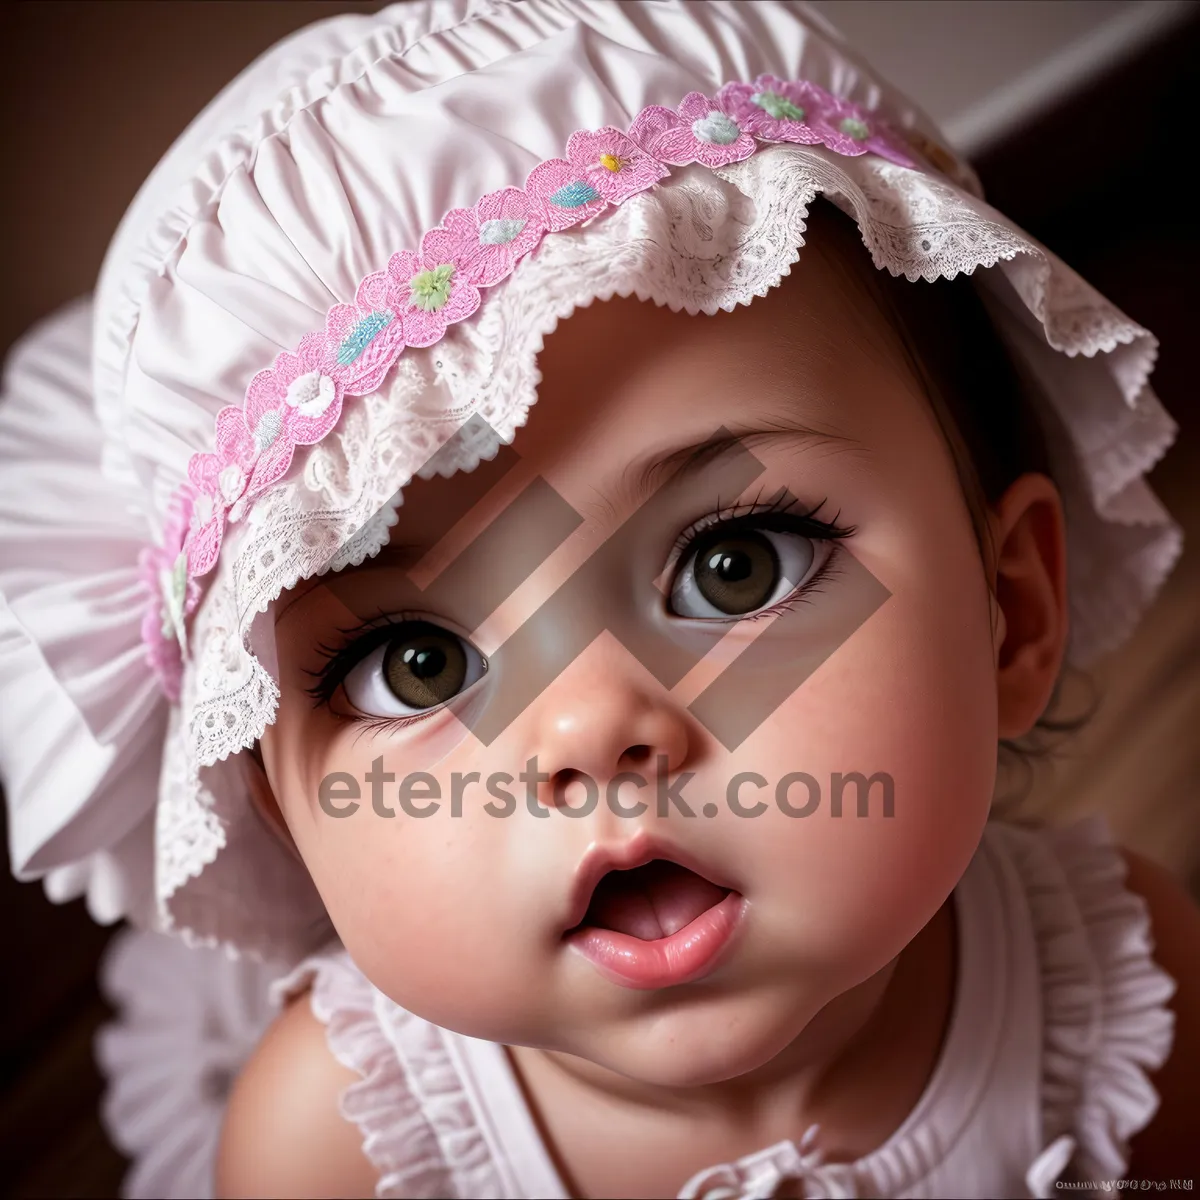 Picture of Cute Smiling Child in Fashionable Bonnet